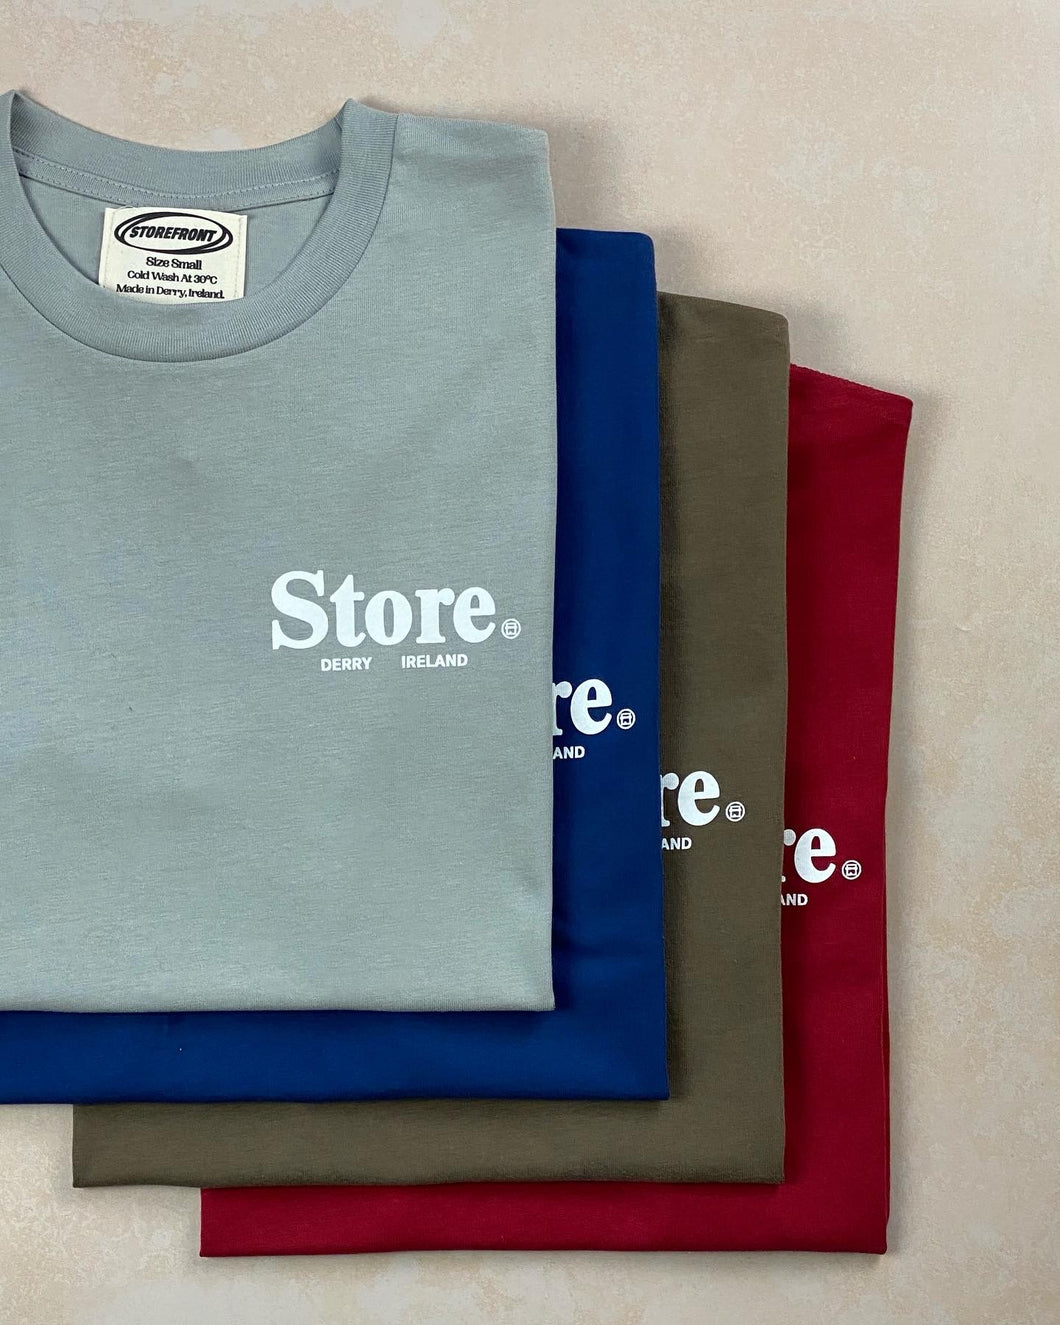 Storefront 'Store' Tee